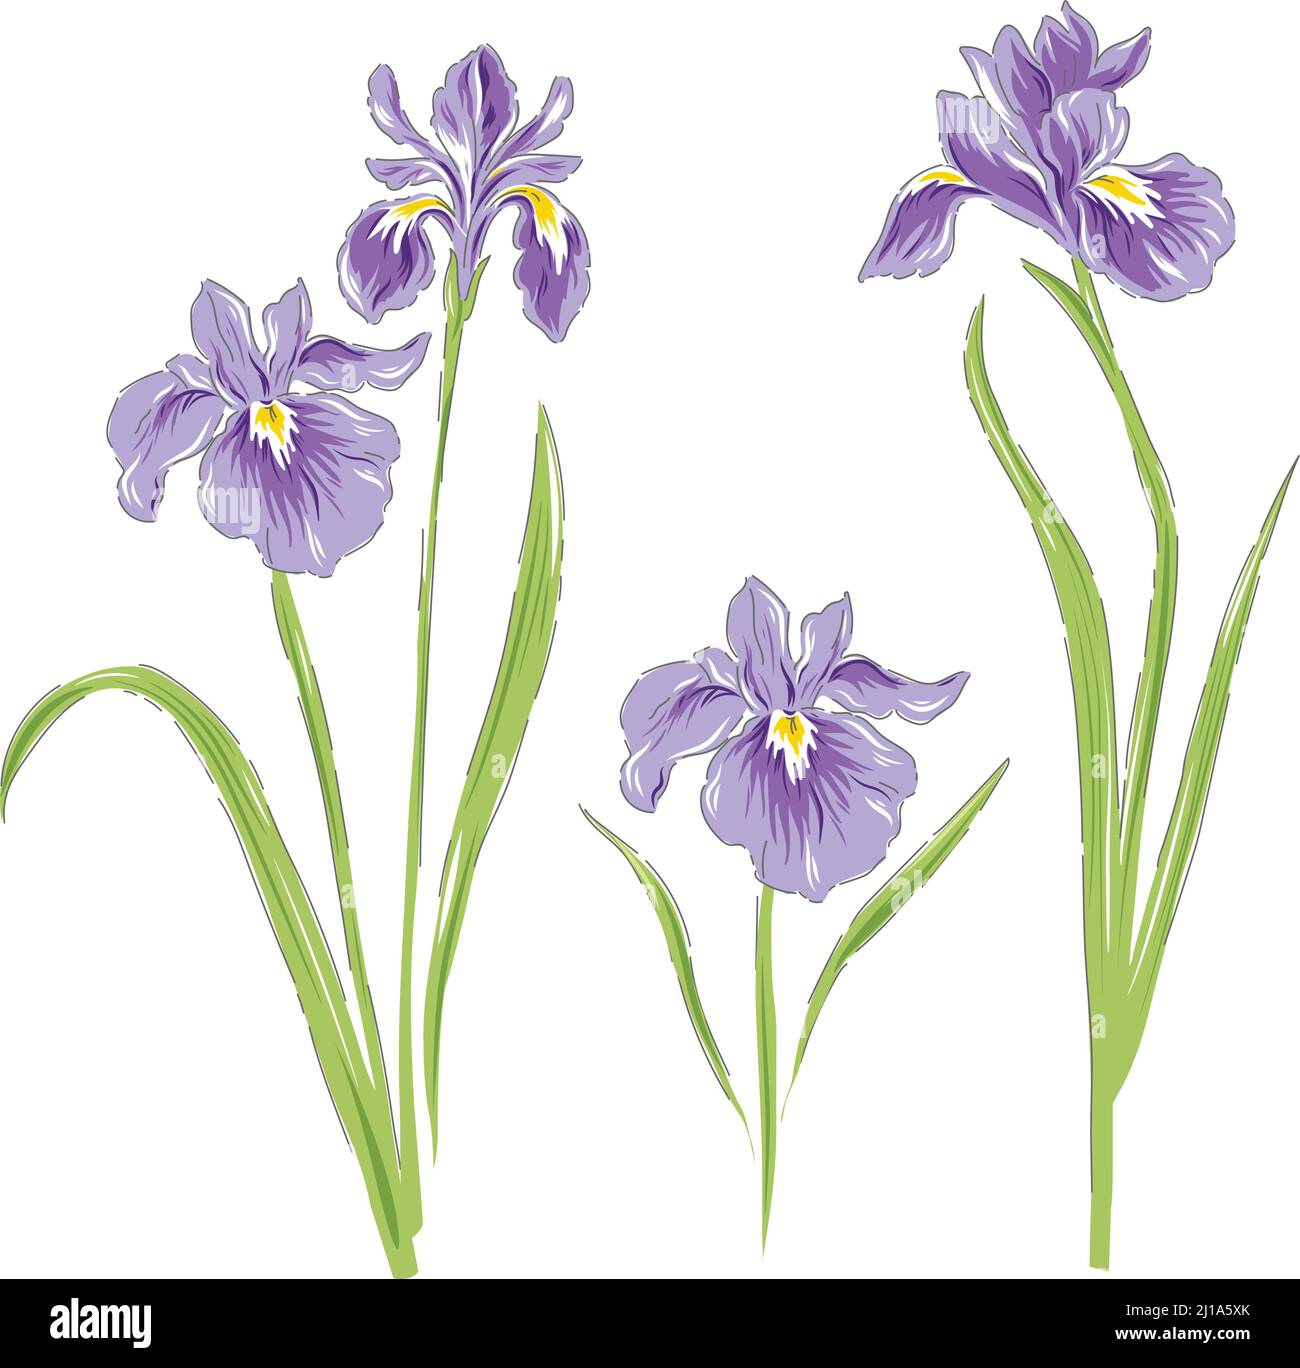 Drawing Iris Flower Realistic High Resolution Stock Photography ...